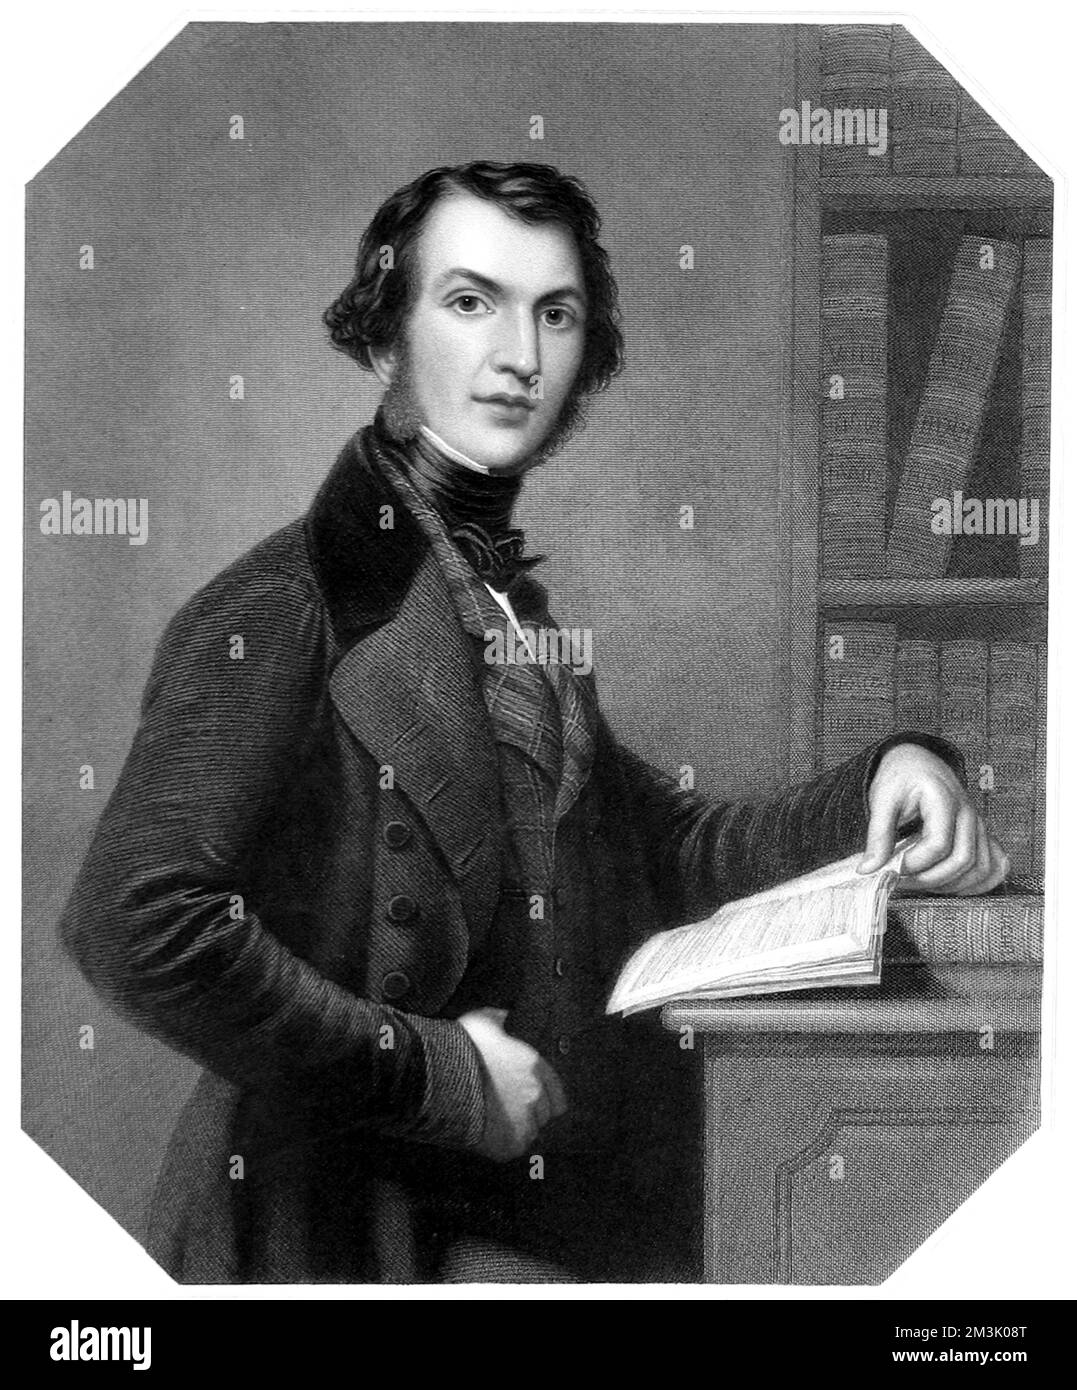 William Ewart Gladstone (1809 - 1898), English Liberal statesman, as a young man. This portrait probably dates from the 1830's when Gladstone was elected by the constituents of Newark as a Conservative Member of Parliament. Stock Photo